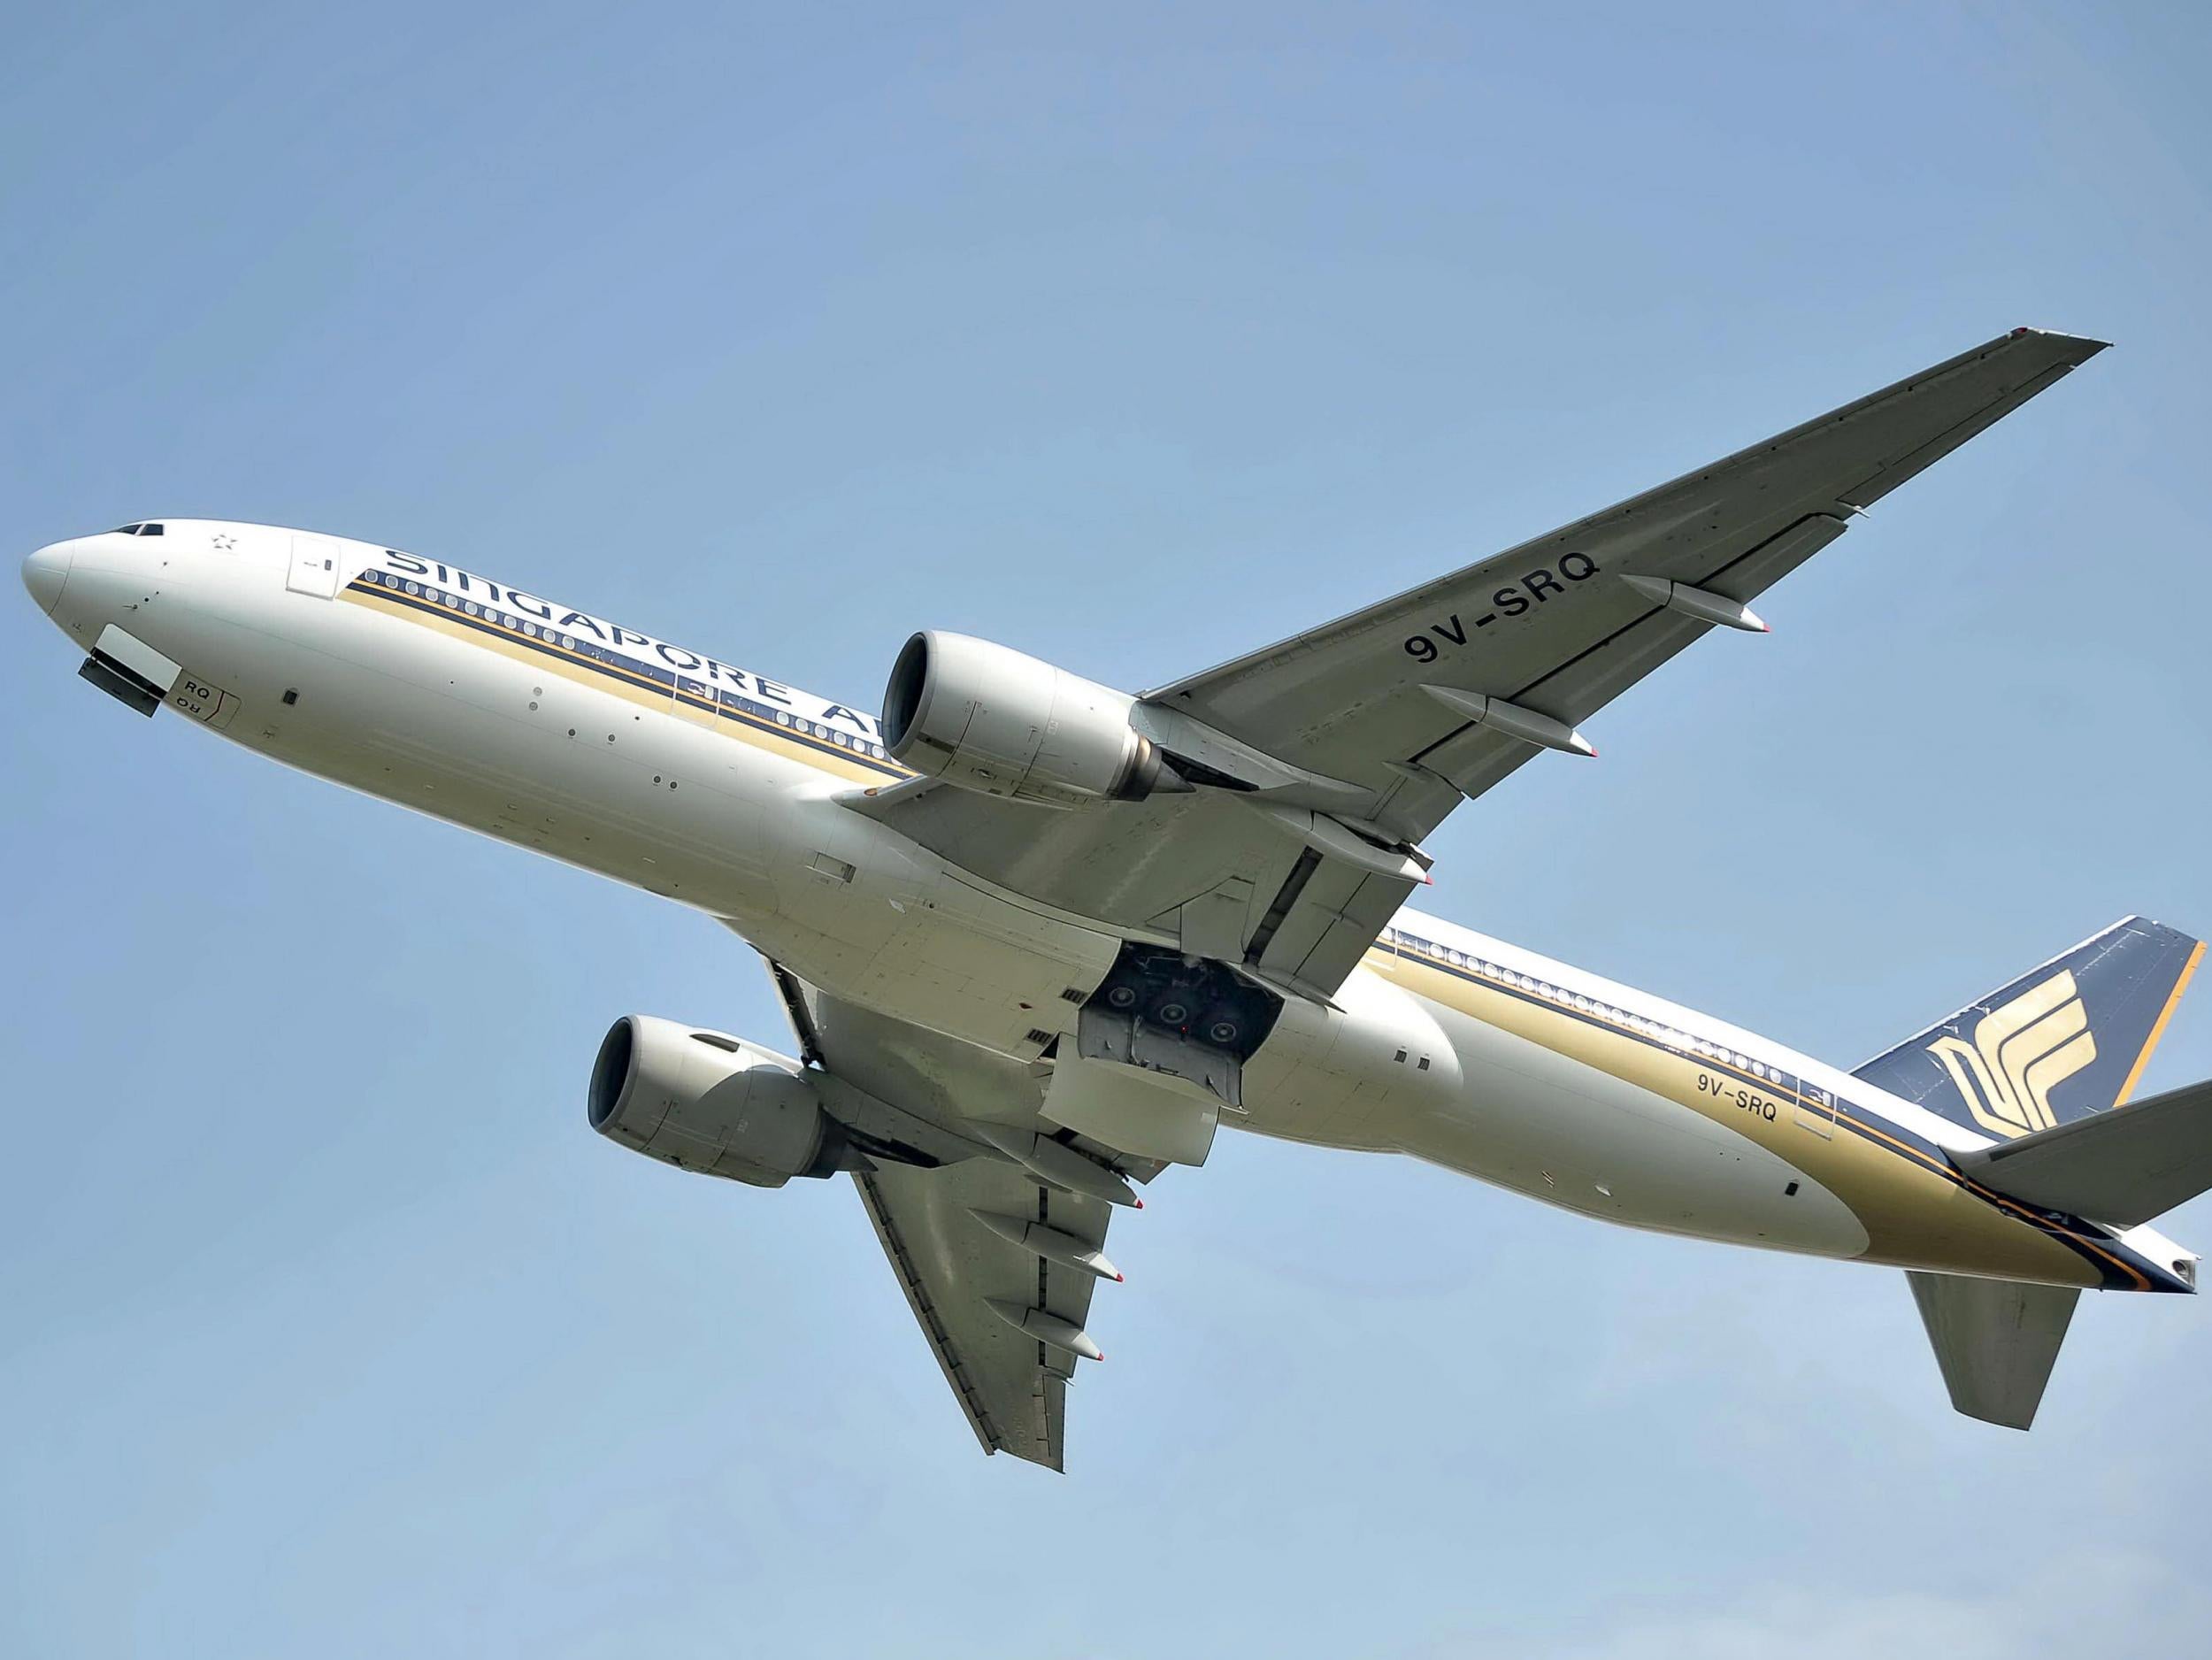 Singapore Airlines will begin flights from Manchester to Texas in October